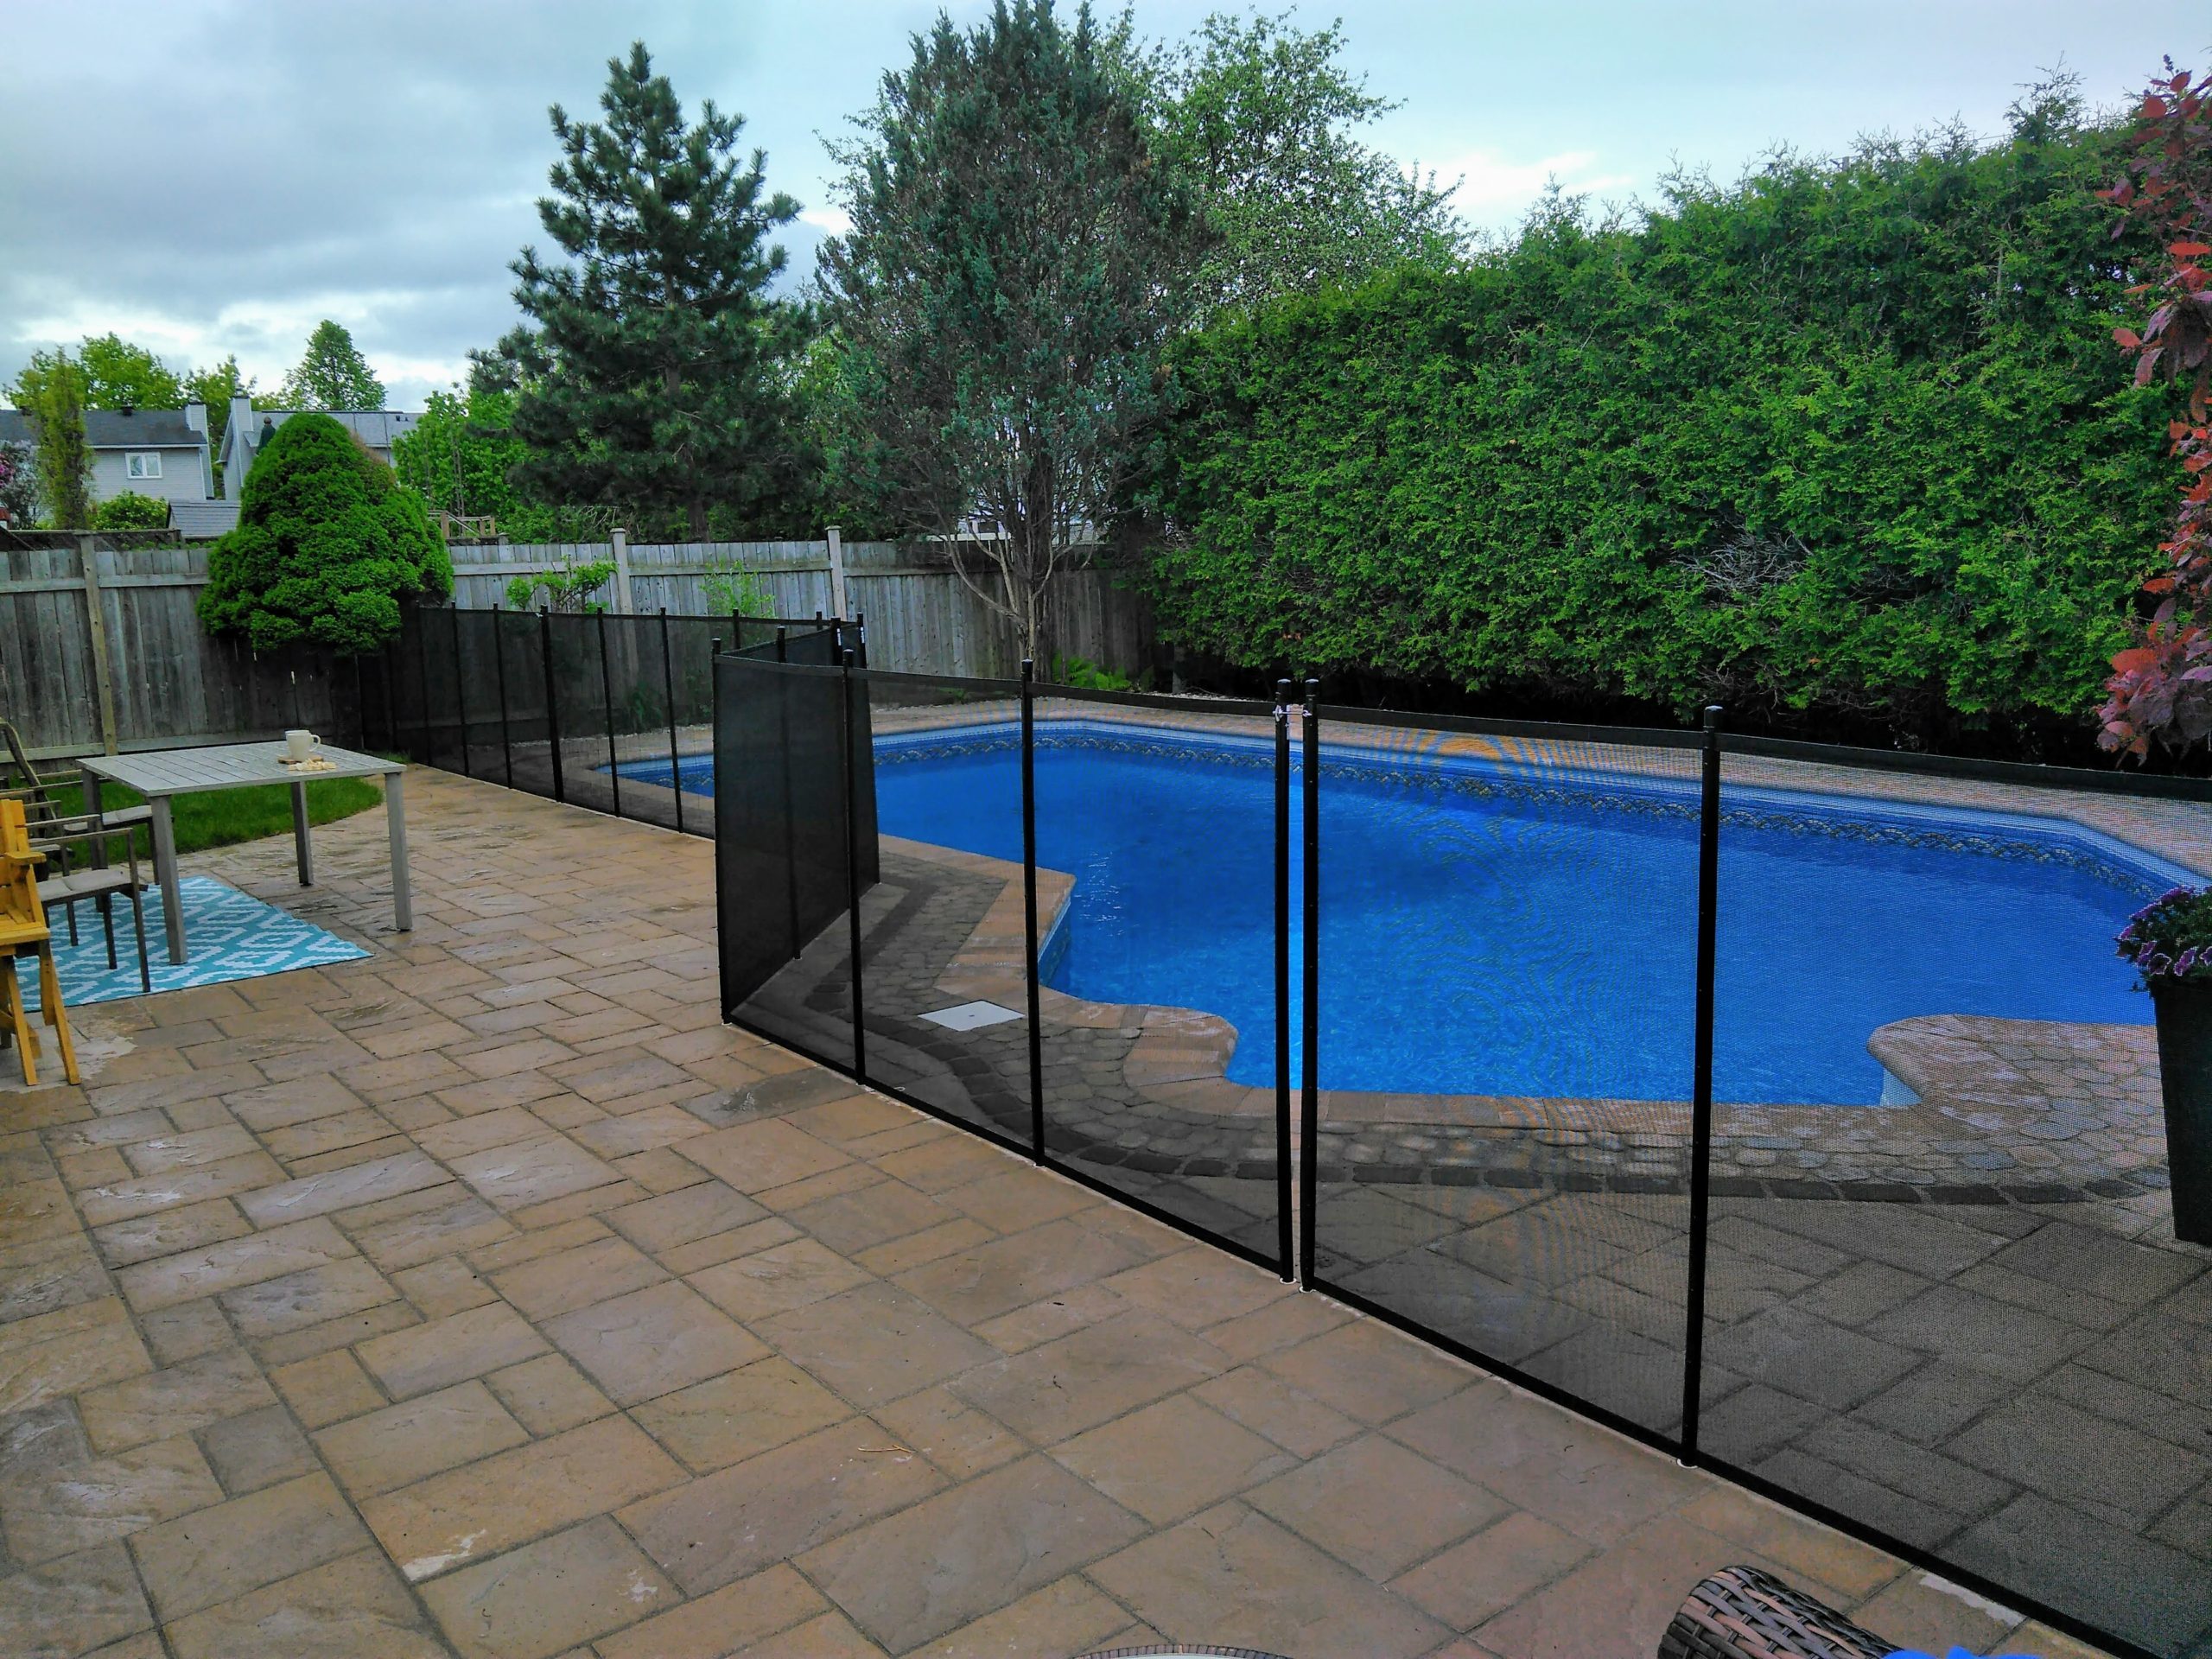 protect a child pool fence cost